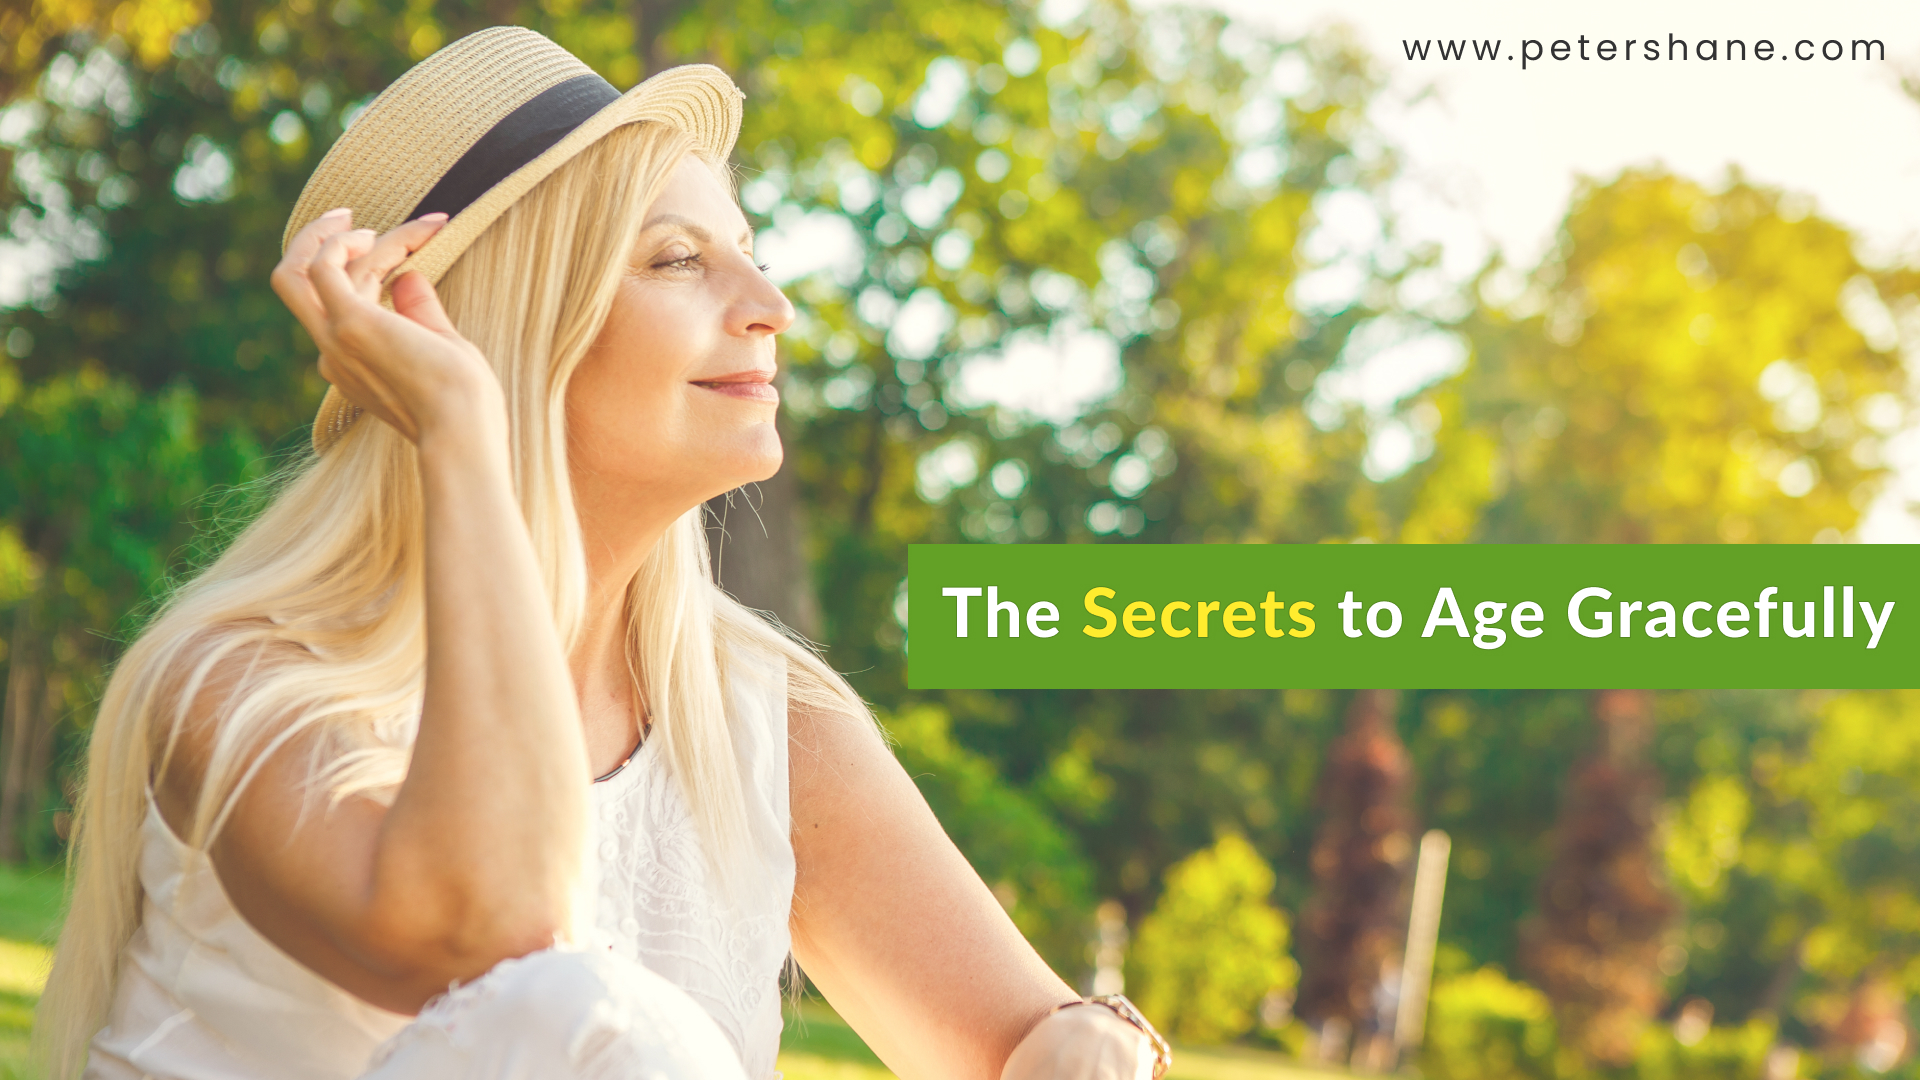 The Secrets to Age Gracefully - PeterShane.com